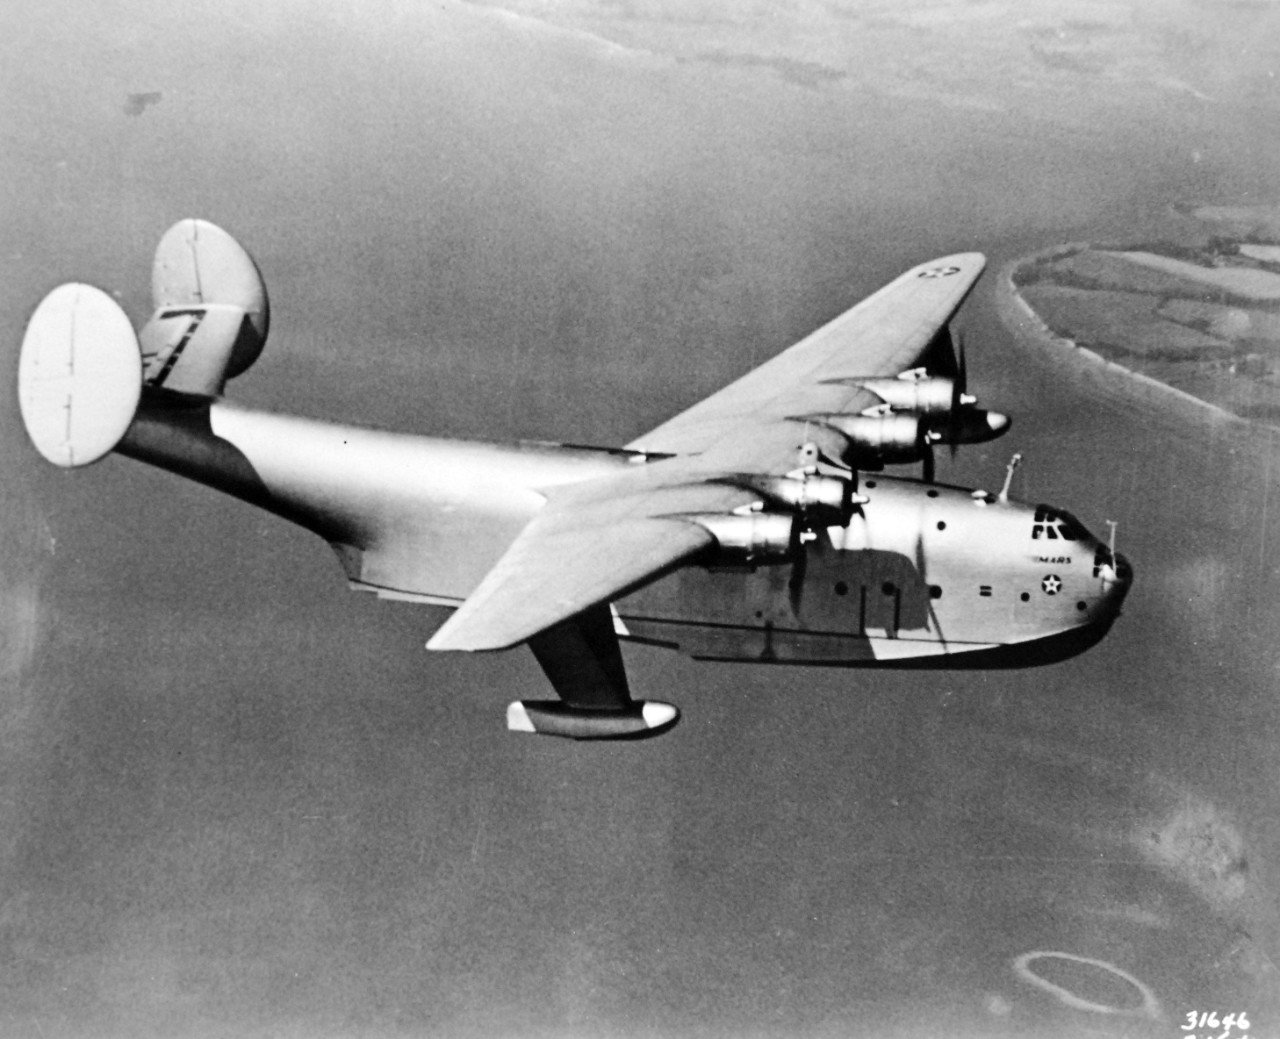 LC-Lot-3465-6: Martin JRM “Mars” aircraft, XPB2M-1, 1941.   Original caption, “Seventy tons of fighting strength were added to the Navy air force when Mars, the largest ship ever to fly, was completed. A Martin-built plane, it has four 2,000 horsepower motors, a hull the size of a 15-room house, and a wing-expansion equivalent to the height of a 20-story building. Mars can fly non-stop to Europe and back. Office of War Information photograph. Courtesy of the Library of Congress. 